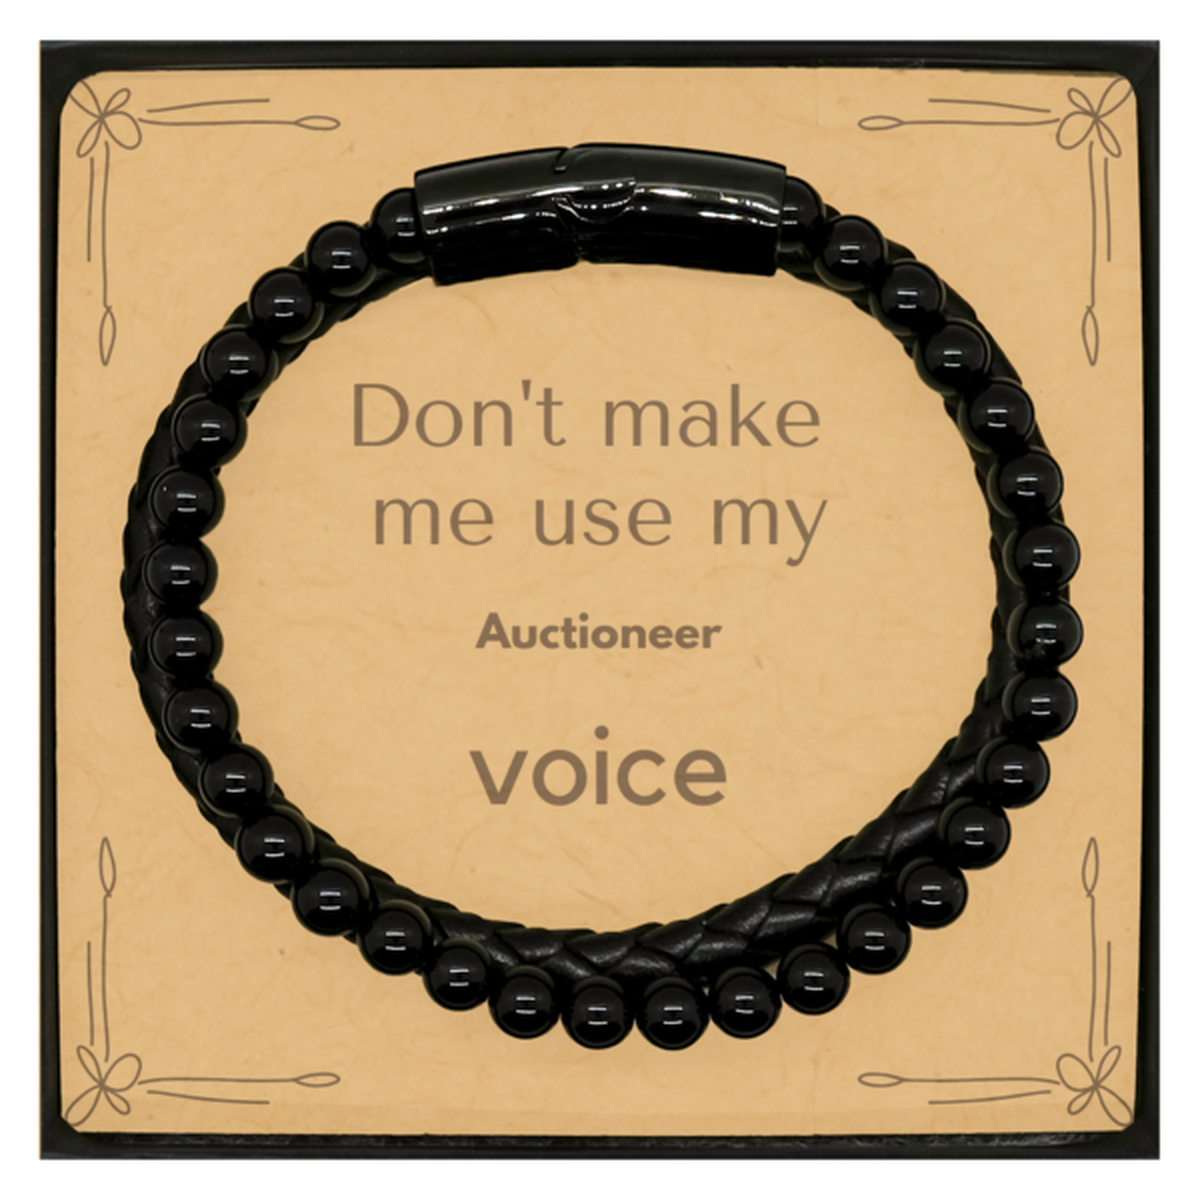 Don't make me use my Auctioneer voice, Sarcasm Auctioneer Card Gifts, Christmas Auctioneer Stone Leather Bracelets Birthday Unique Gifts For Auctioneer Coworkers, Men, Women, Colleague, Friends